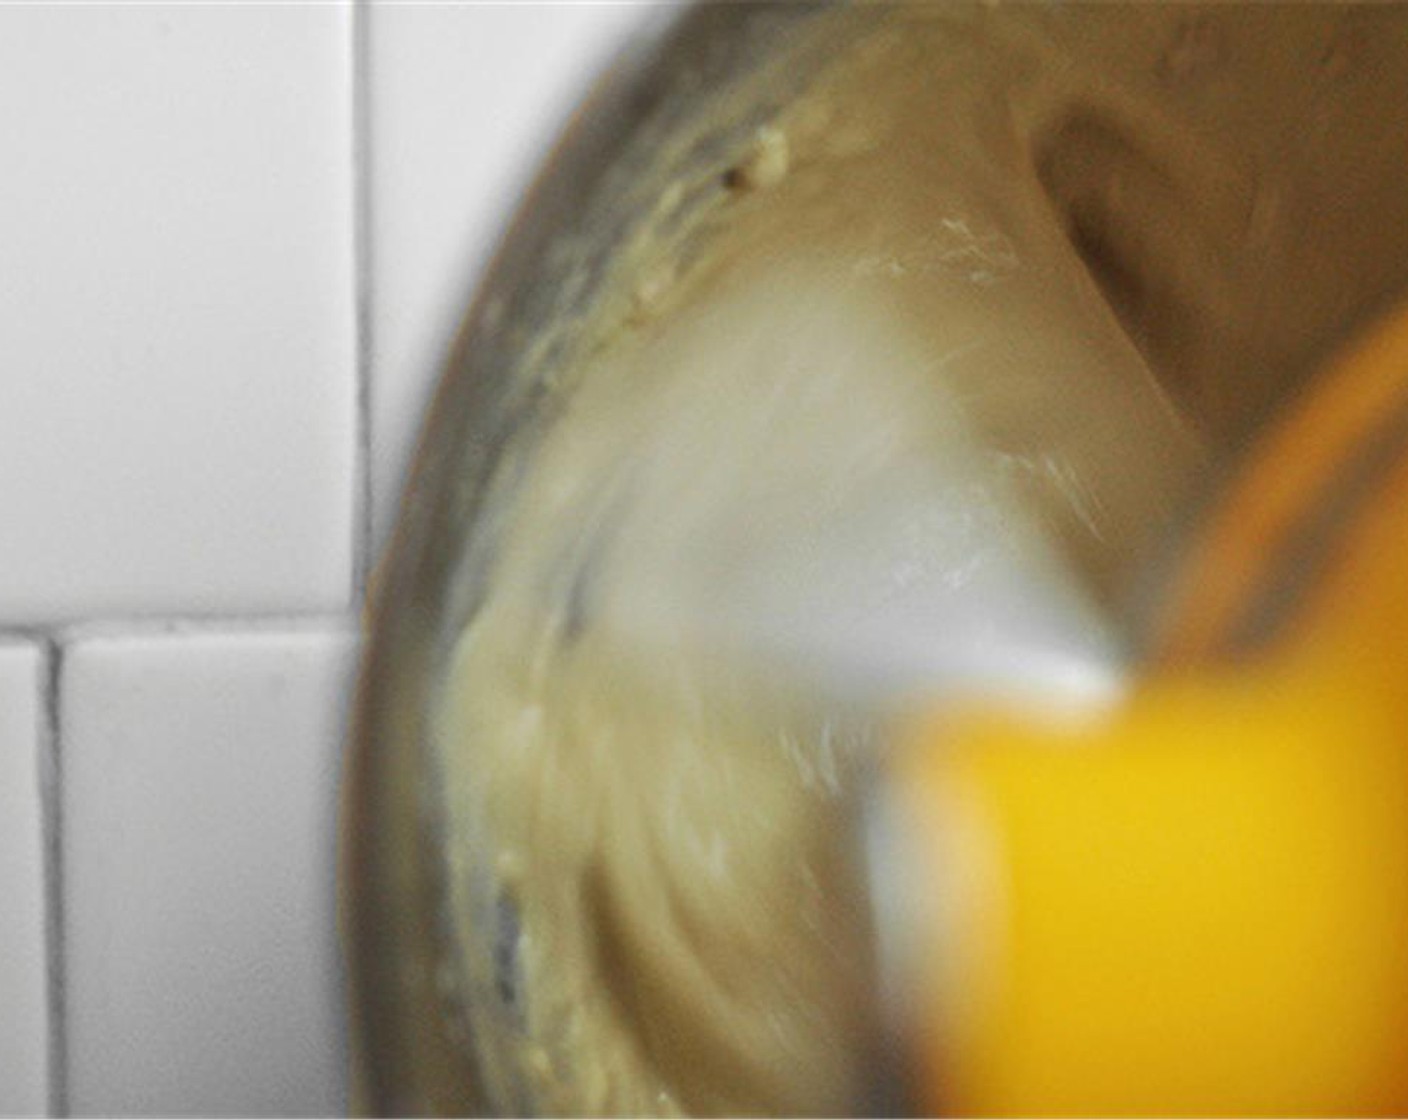 step 3 Combine the remaining  warm whole milk and Active Dry Yeast (1 Tbsp) in the bowl of a stand mixer fitted with the paddle attachment. Add the sponge, Granulated Sugar (2 Tbsp), Salt (1/2 tsp), Vanilla Extract (1 tsp), and Eggs (3).